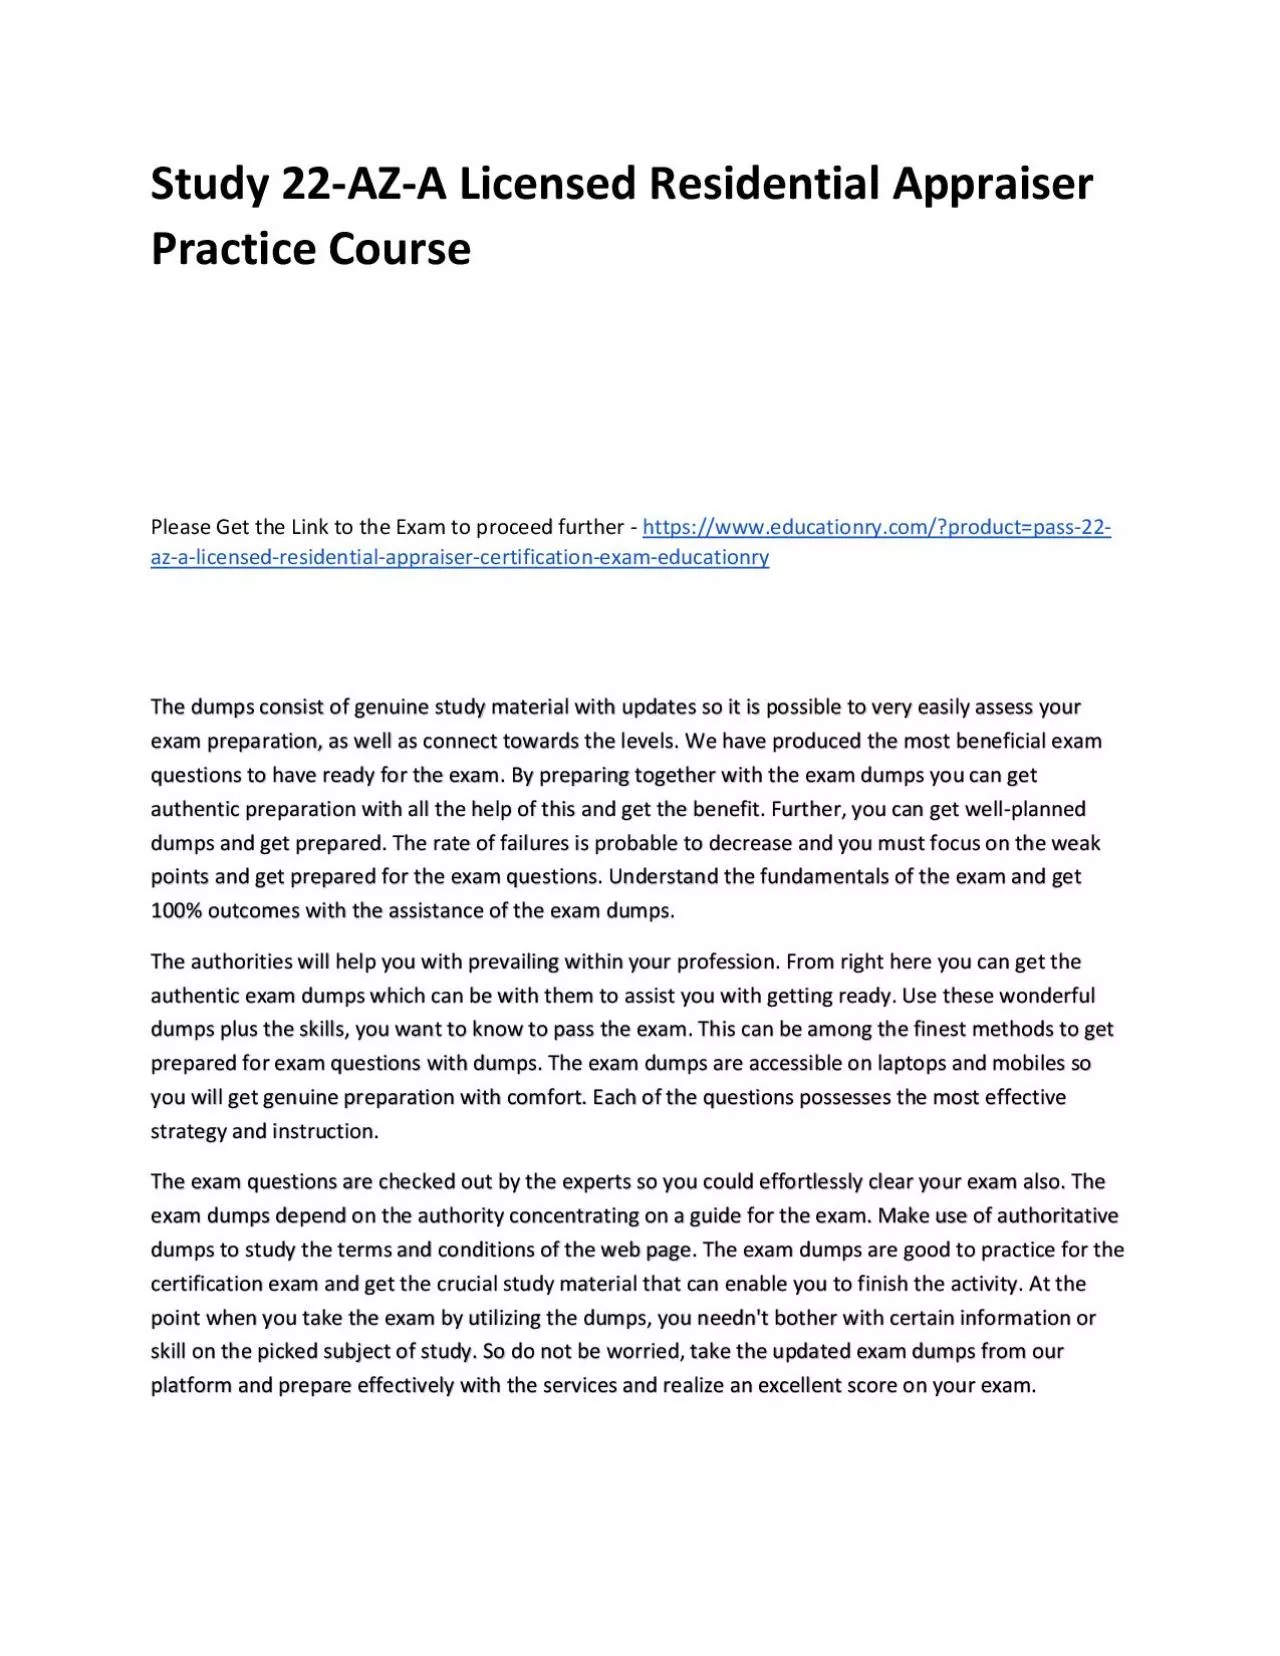 Study 22-AZ-A Licensed Residential Appraiser Practice Course